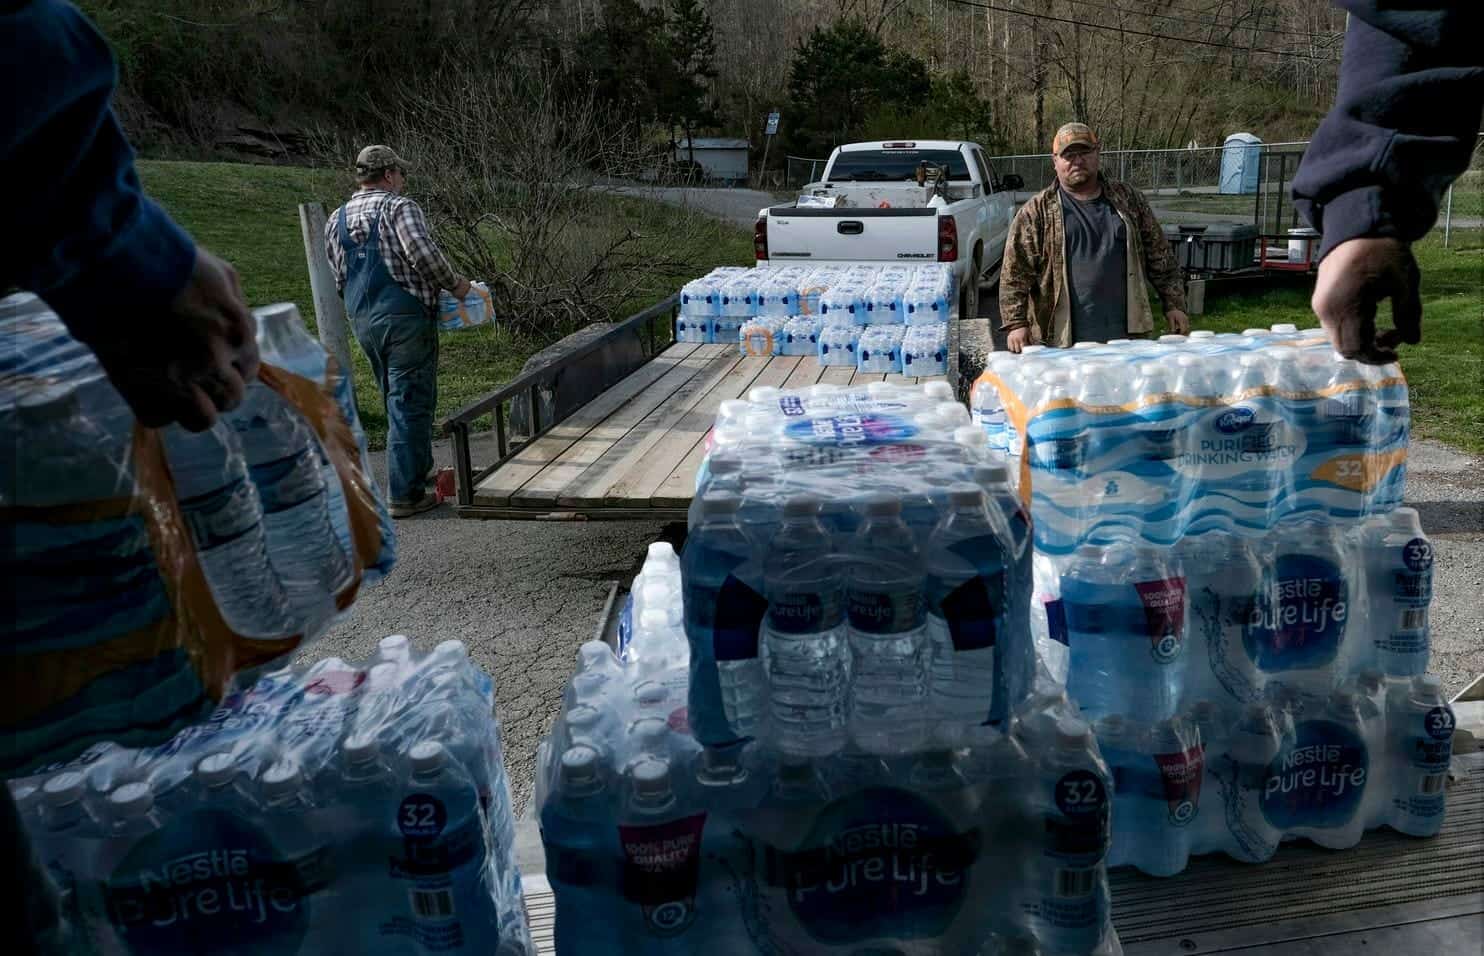 A crisis in Kentucky shows the high cost of clean drinking water